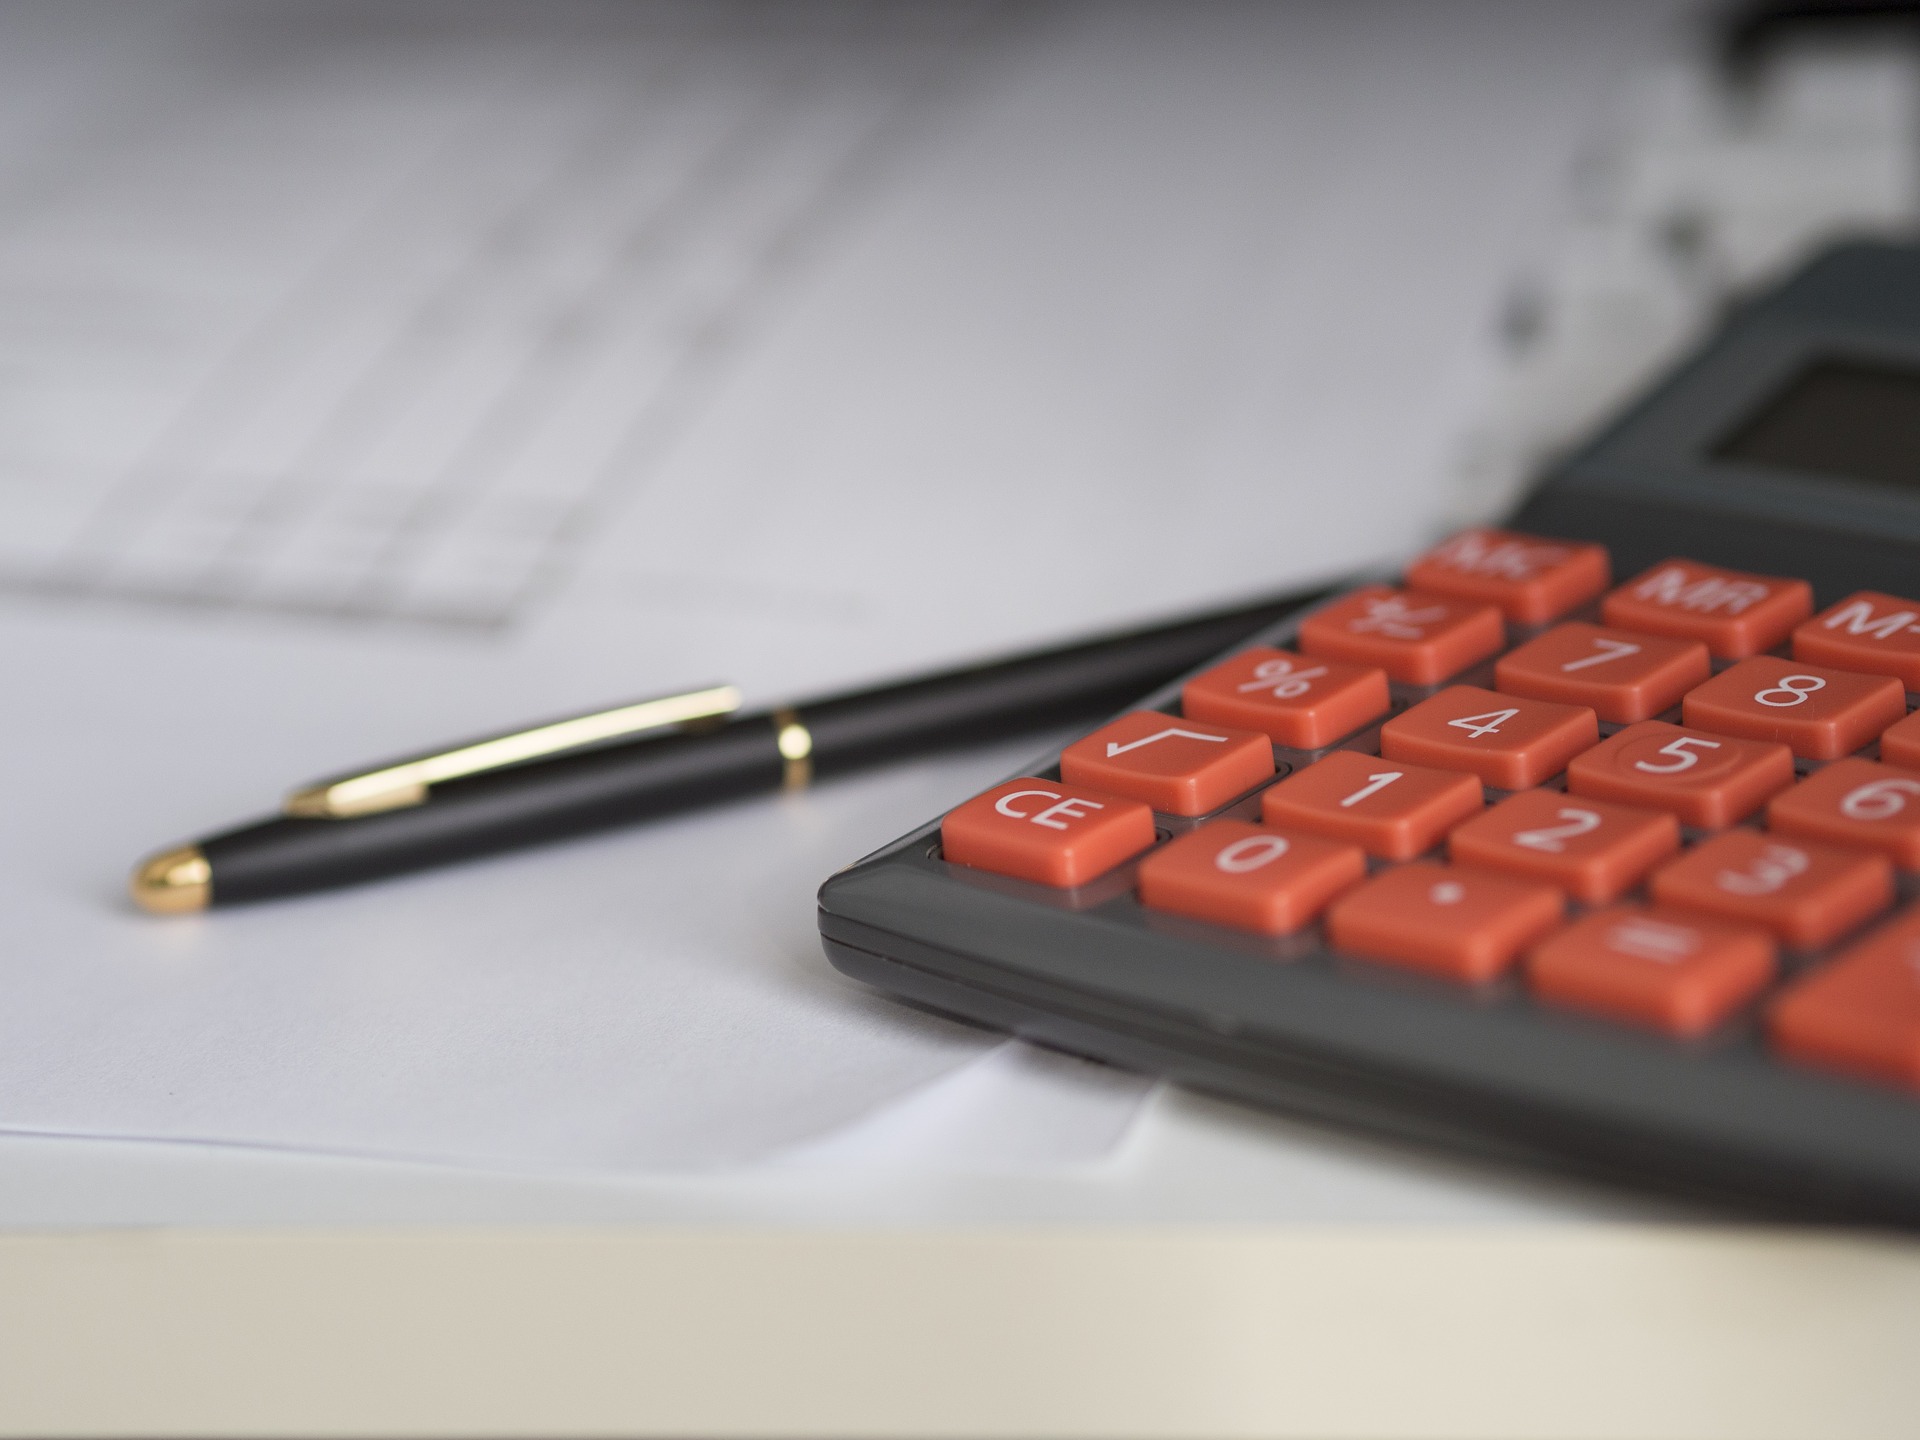 Black calculator with red buttons lays next to pen, on top of a pile of white papers.